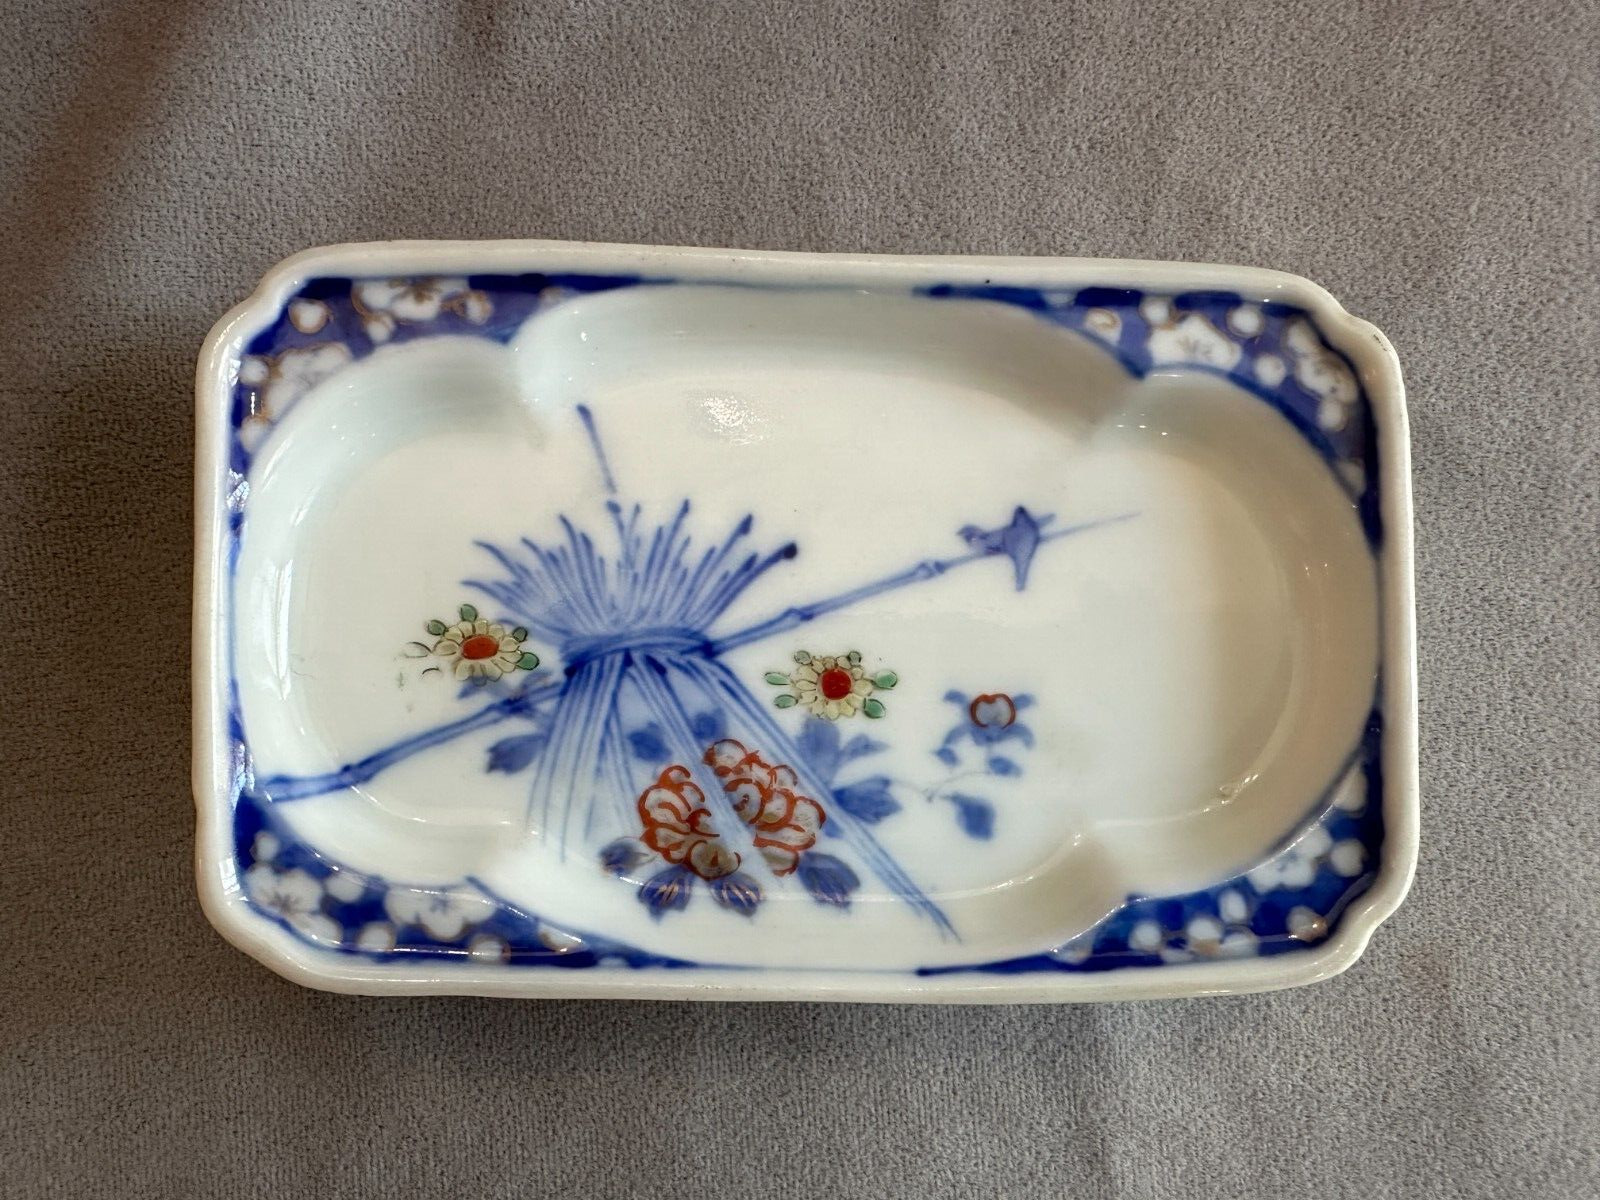 Vintage Japanese Hand-Painted Candy Dish, Aoki Brothers